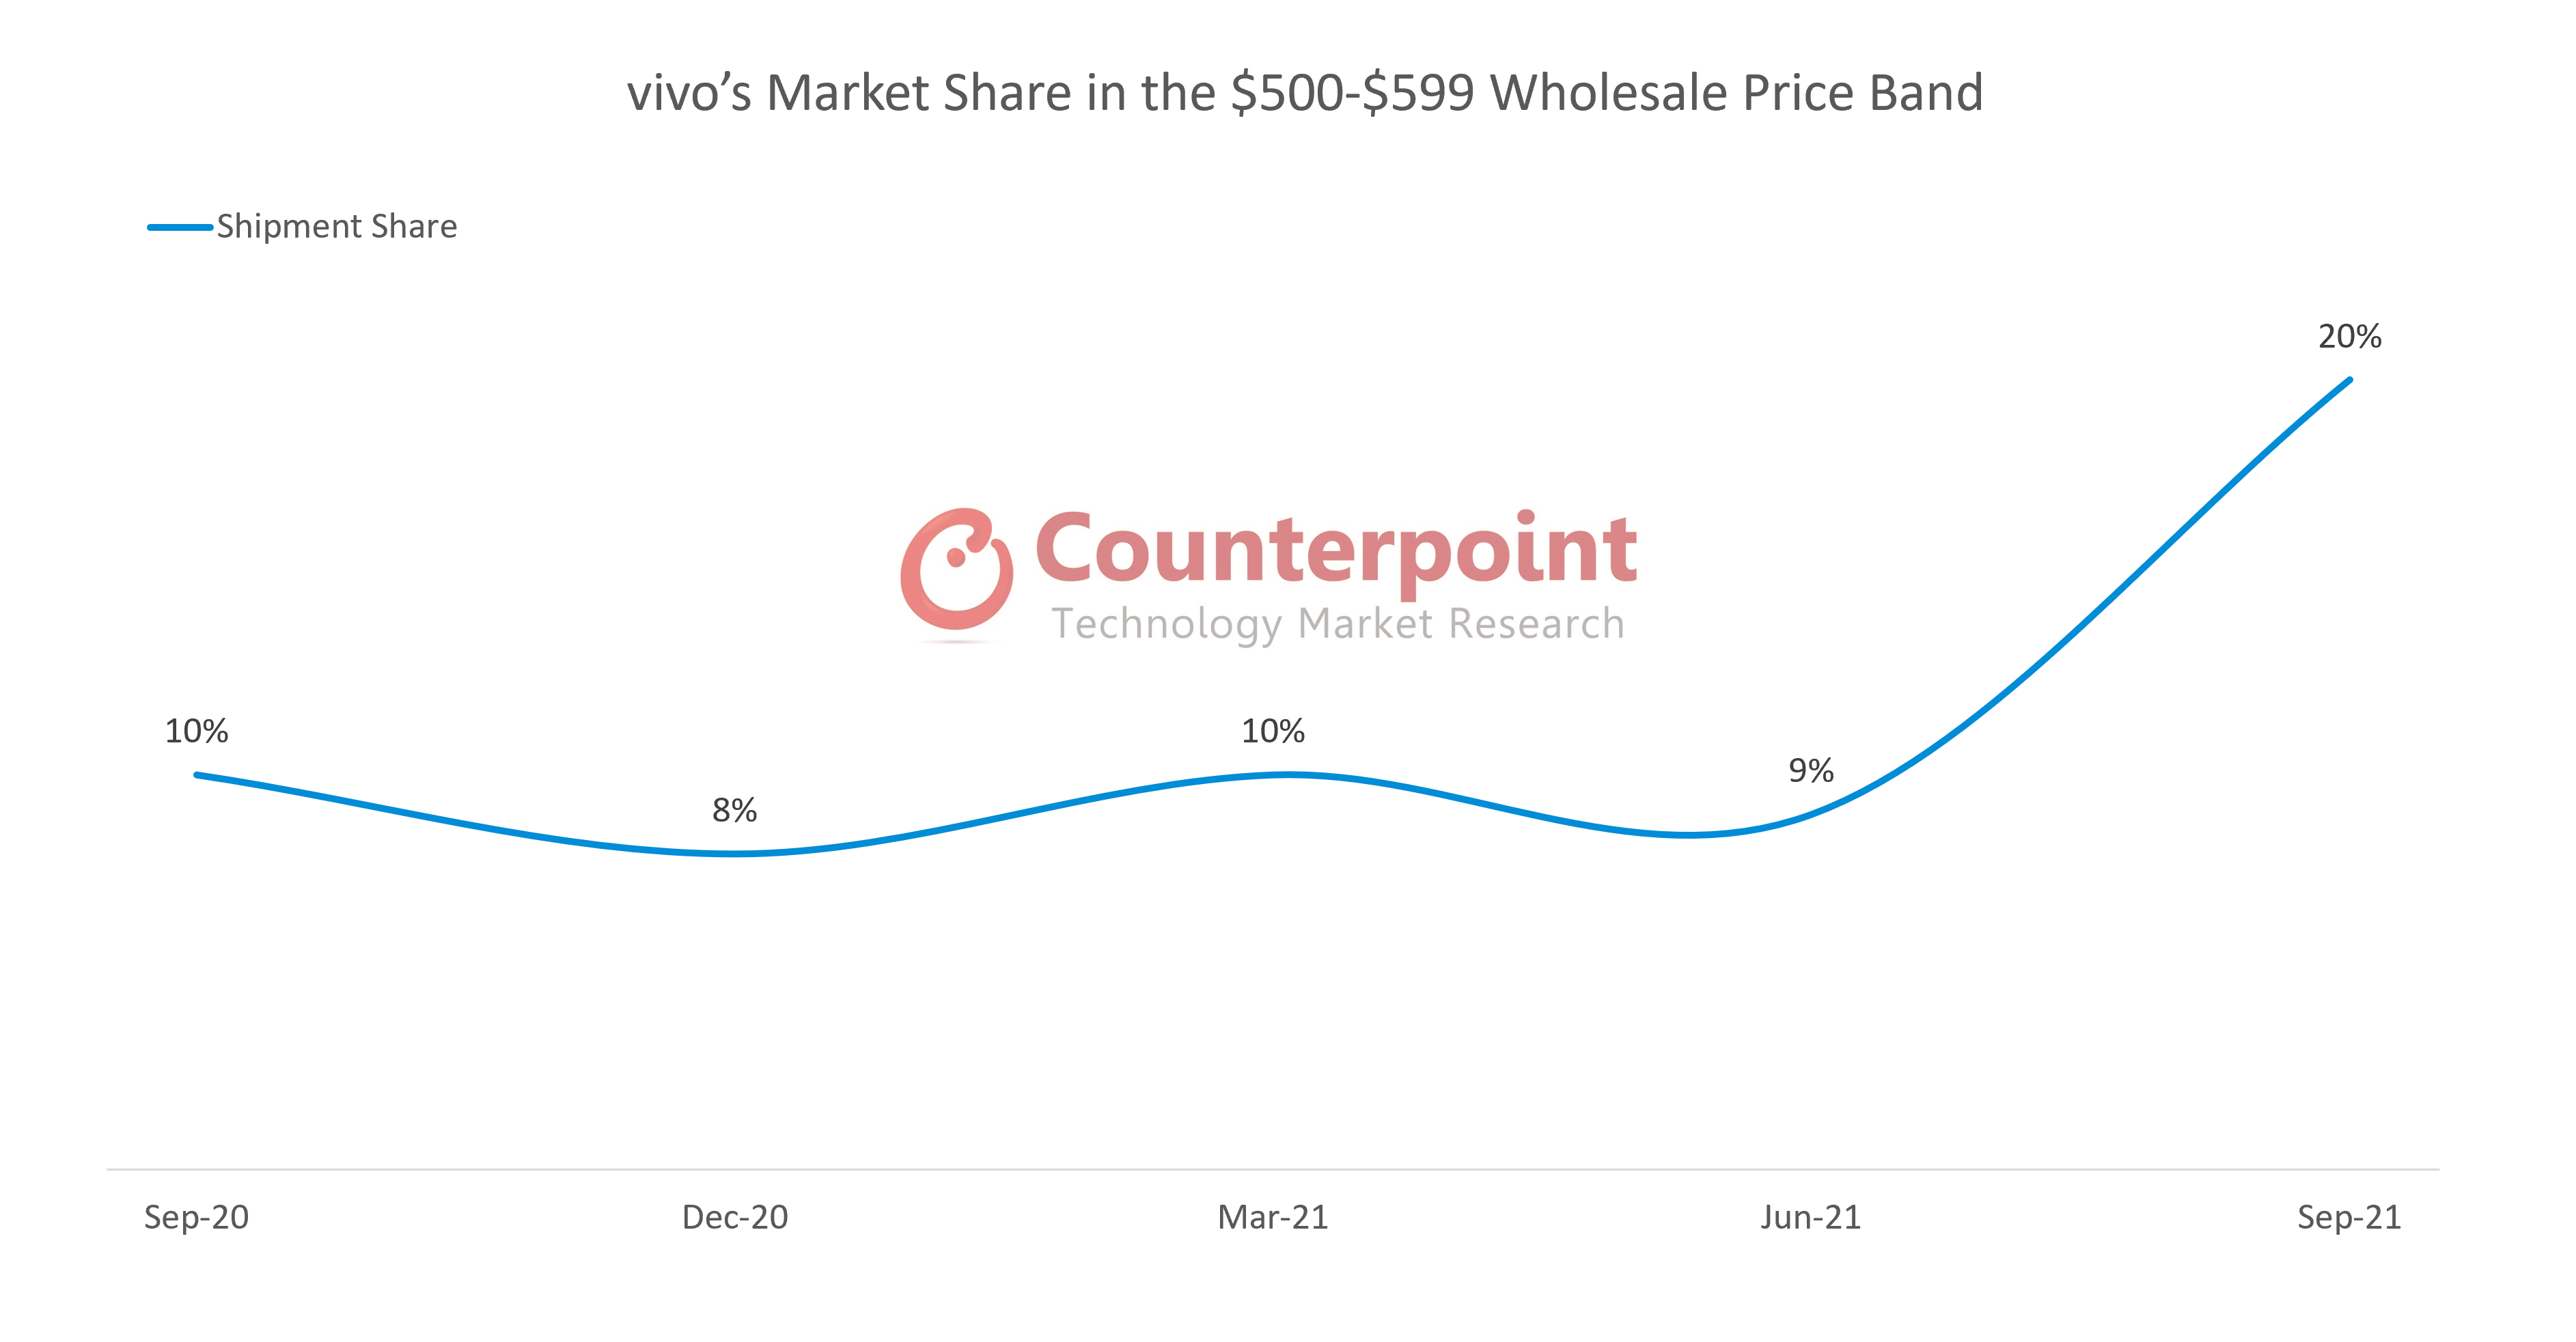 vivo's Market Share in the $500-$599 Price Band